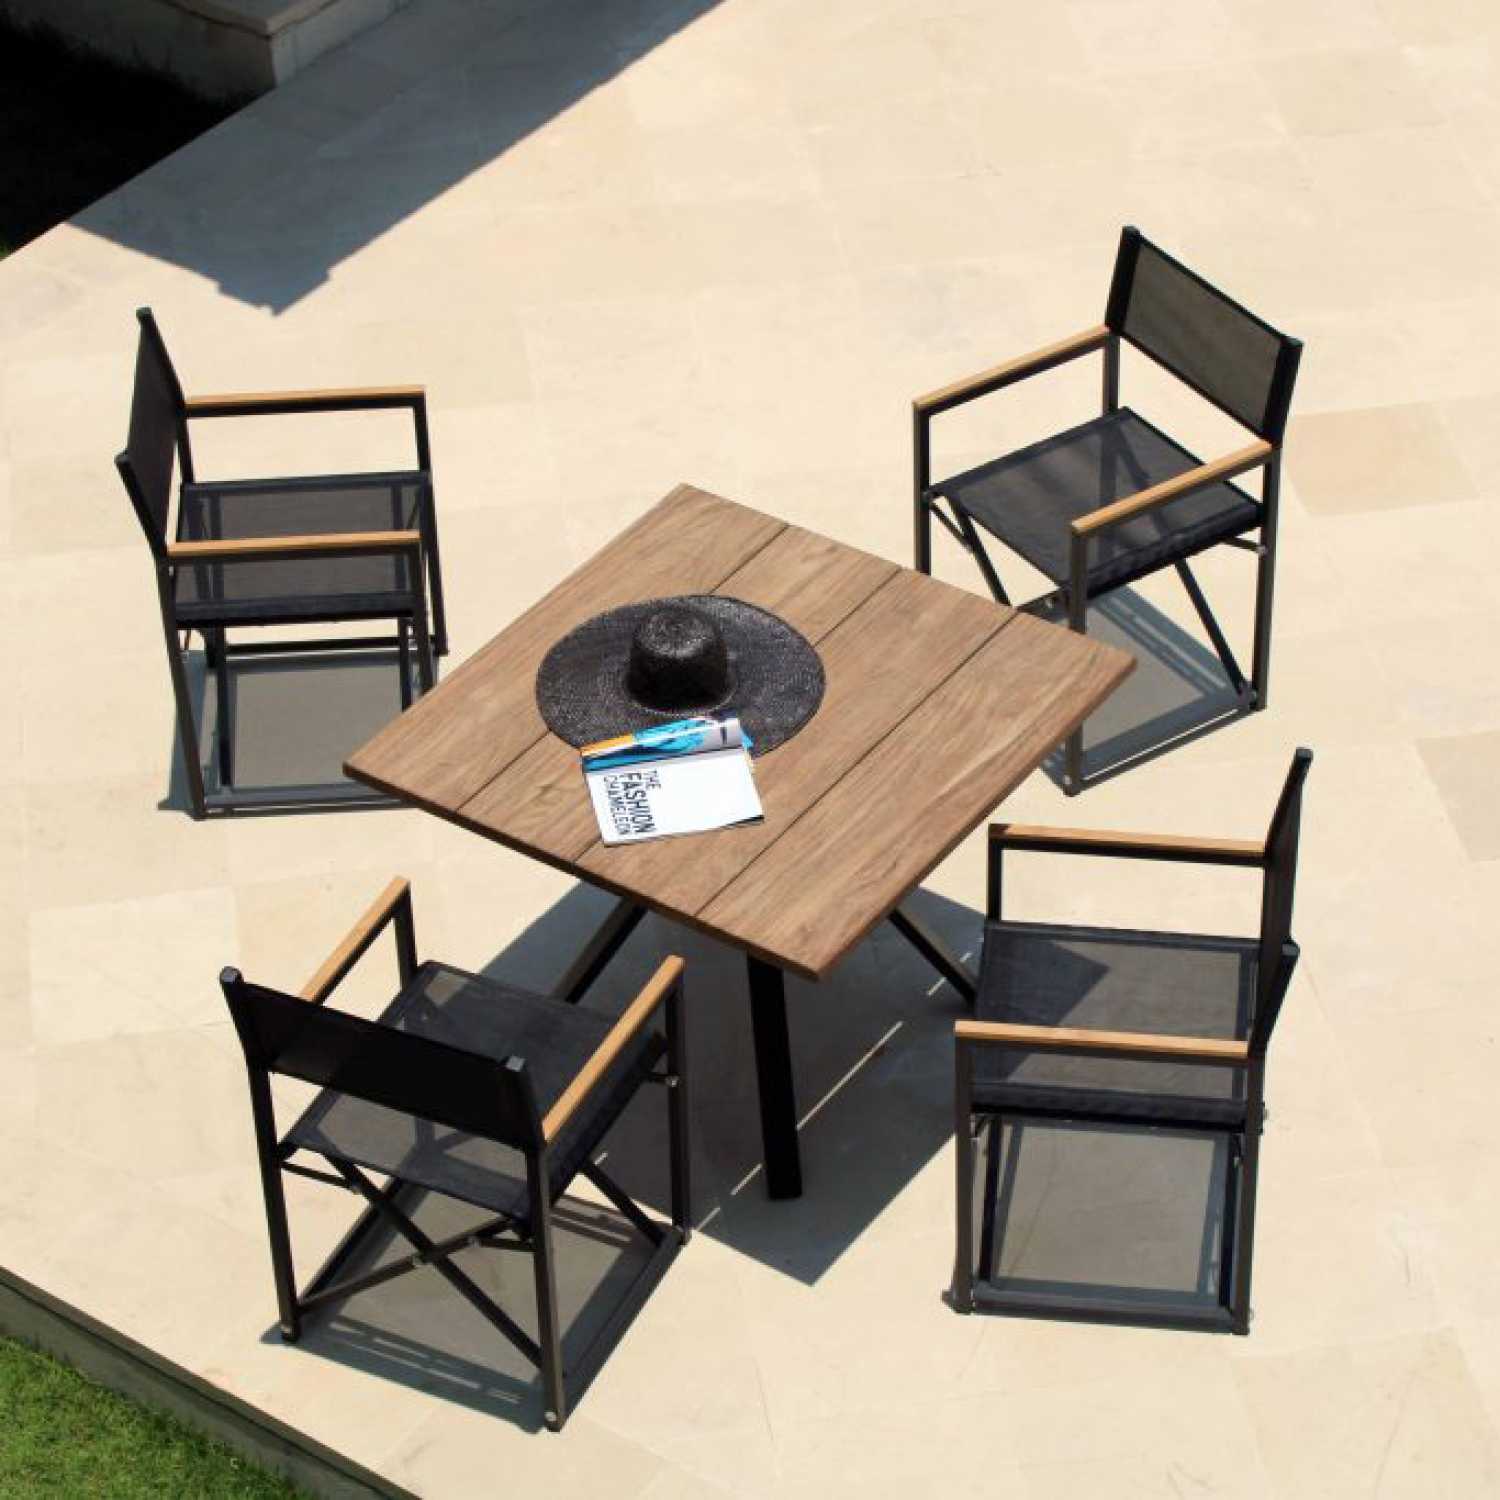 Alaska 4 Seat Dining Table (Square or Round) - PadioLiving - Alaska 4 Seat Dining Table (Square or Round) - Outdoor Dining Set - Square 4 Seat Table - PadioLiving